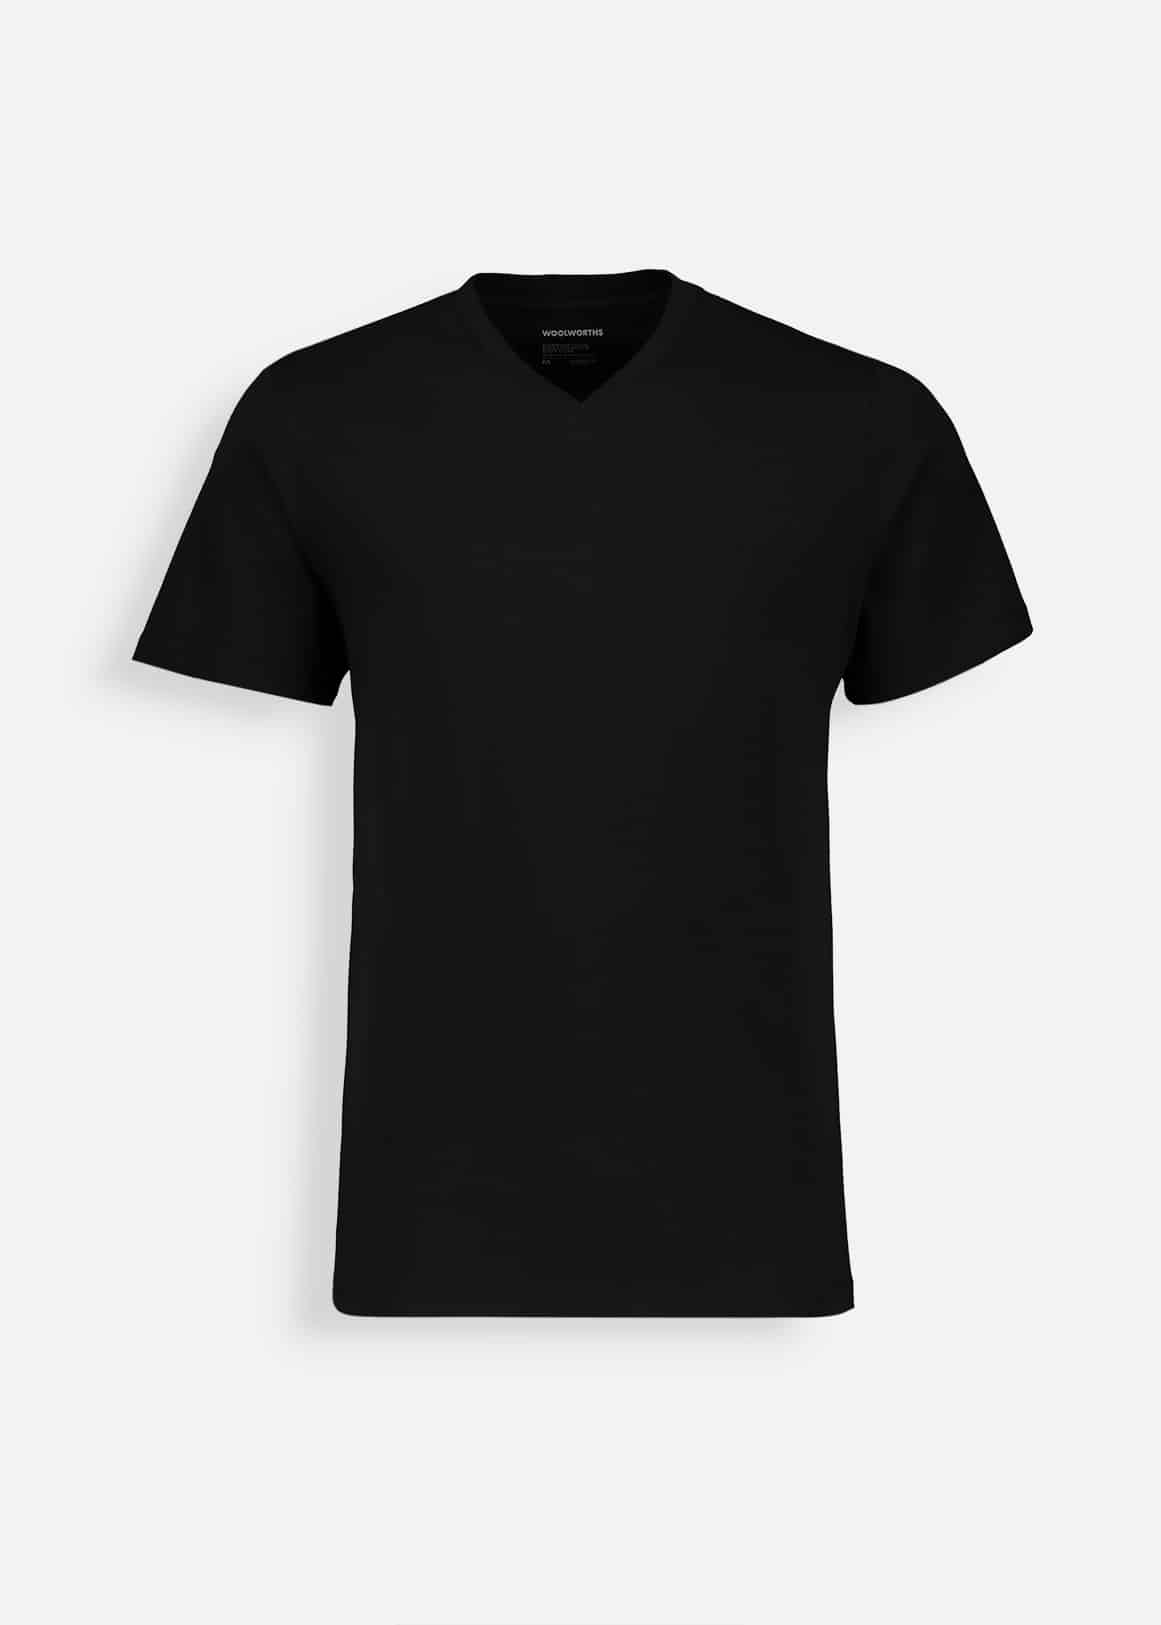 SS22 SS CORE V NECK - Woolworths Mauritius Online